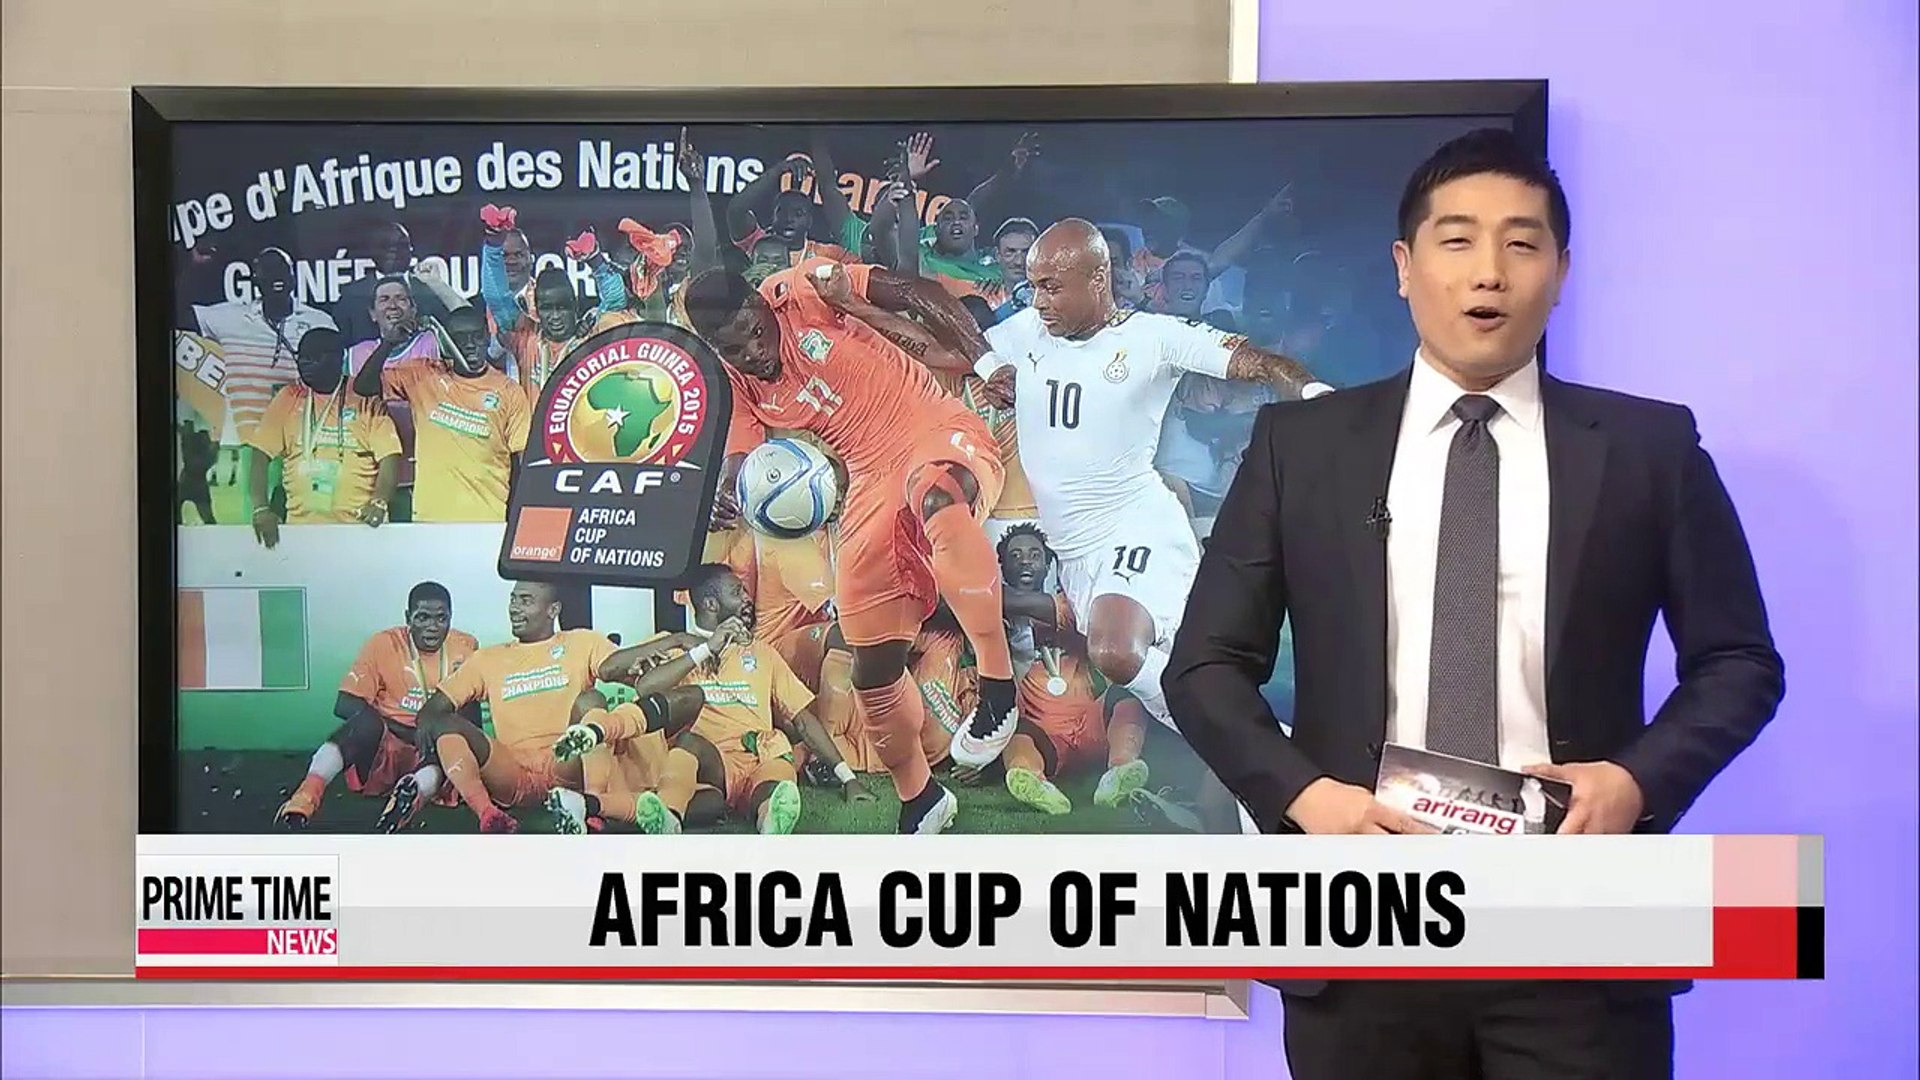 Cote d'Ivoire wins Africa Cup of Nations